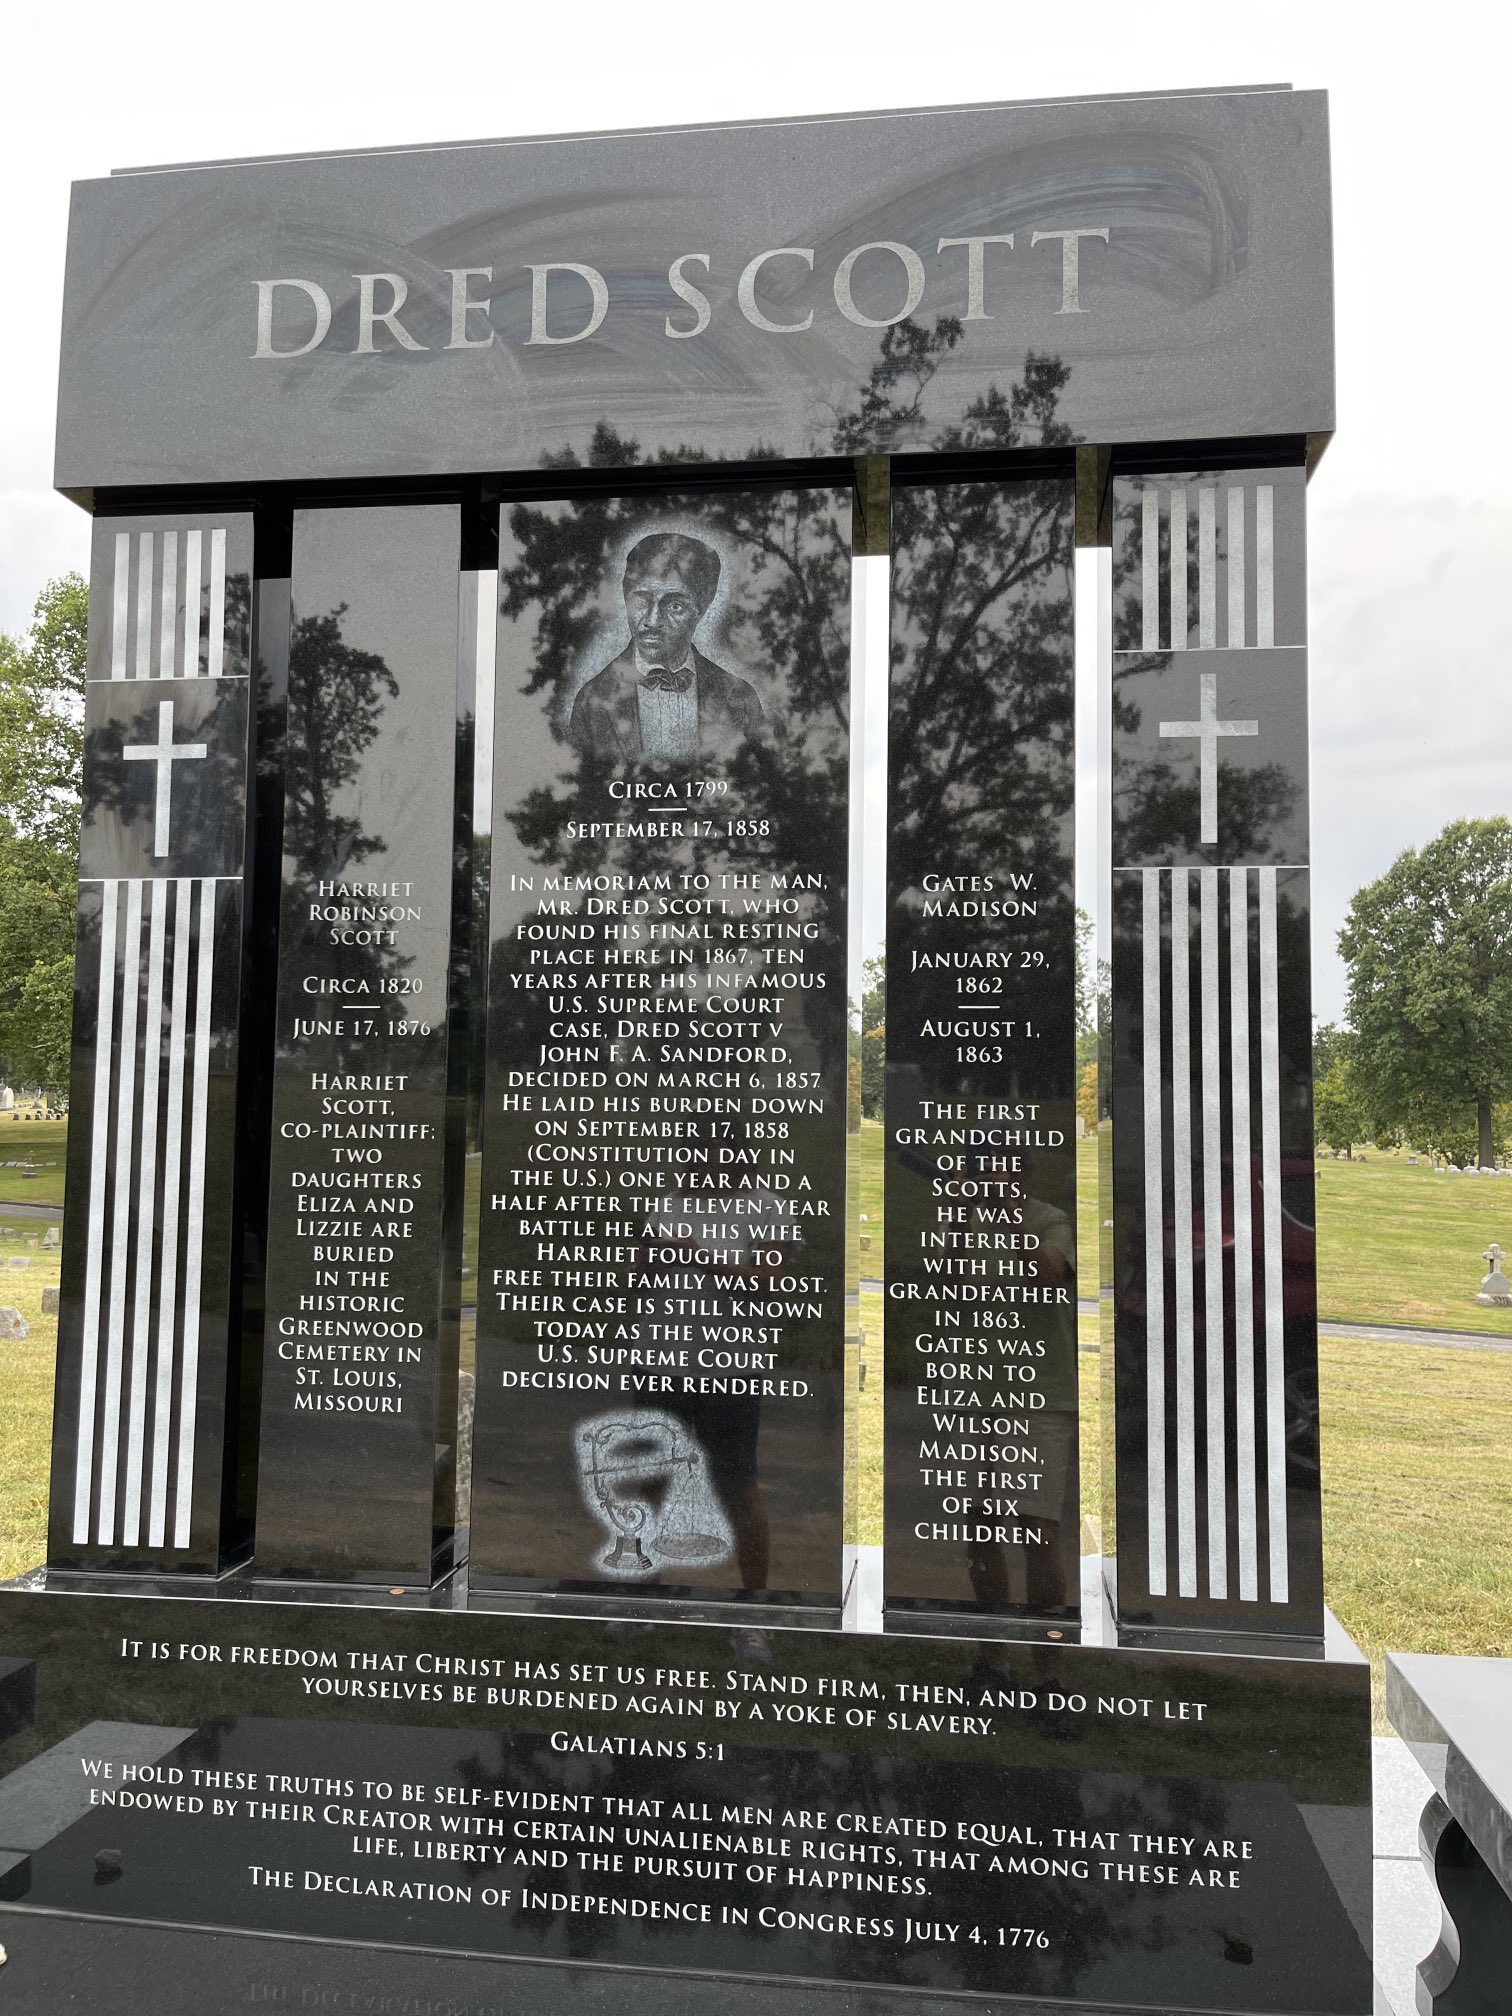 Dred Scott grave marker unveiling Saturday in St. Louis